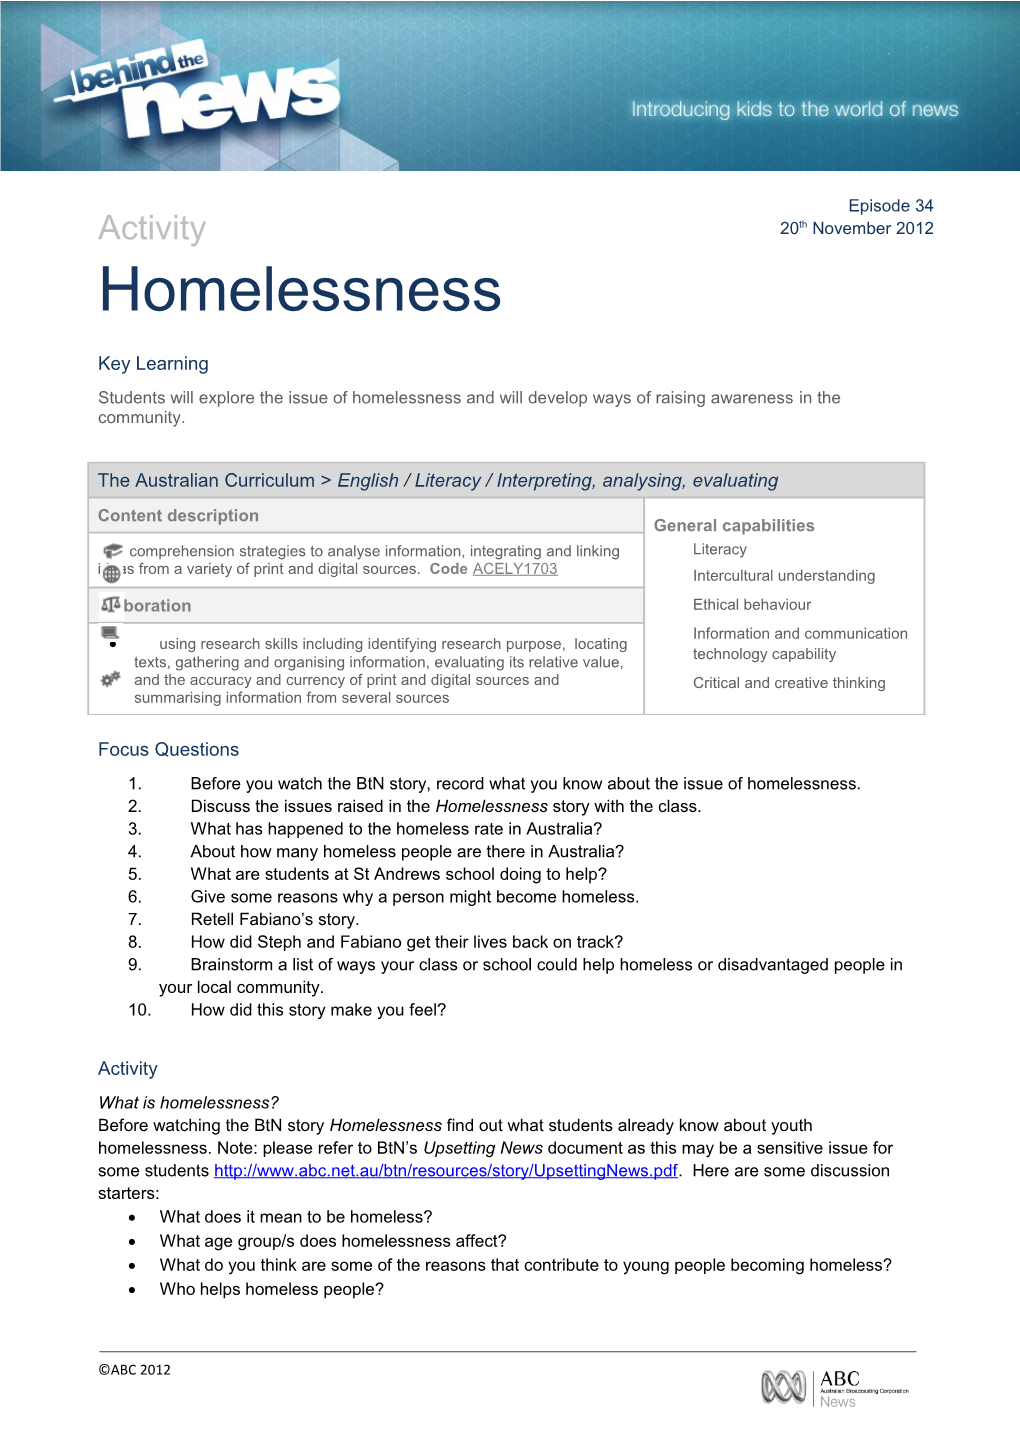 Students Will Explore the Issue of Homelessness and Will Develop Ways of Raising Awareness